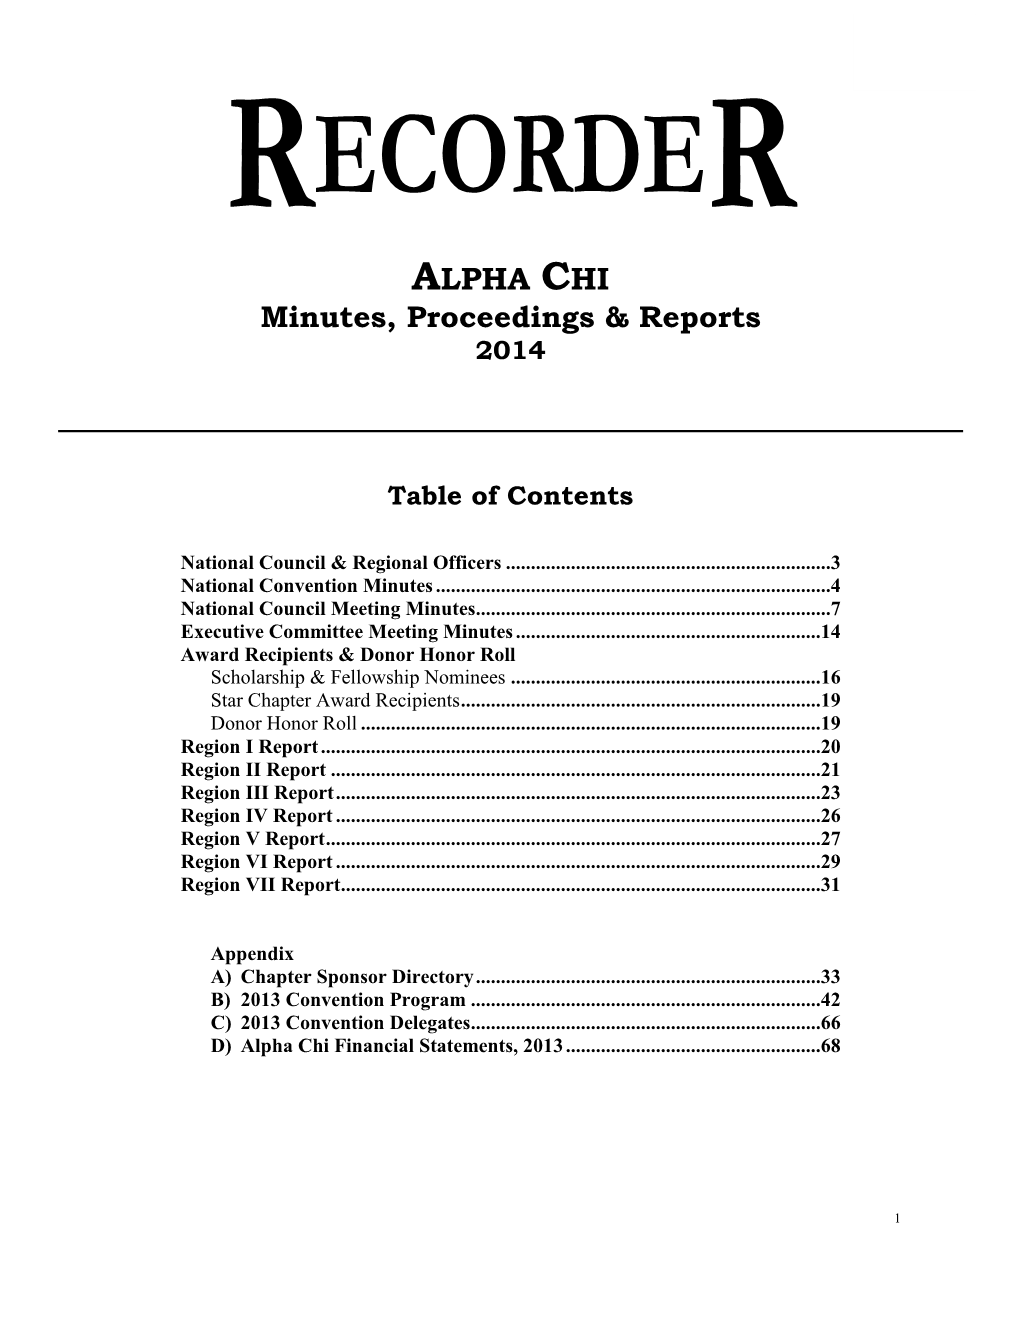 RECORDER ALPHA CHI Minutes, Proceedings & Reports 2014 Table